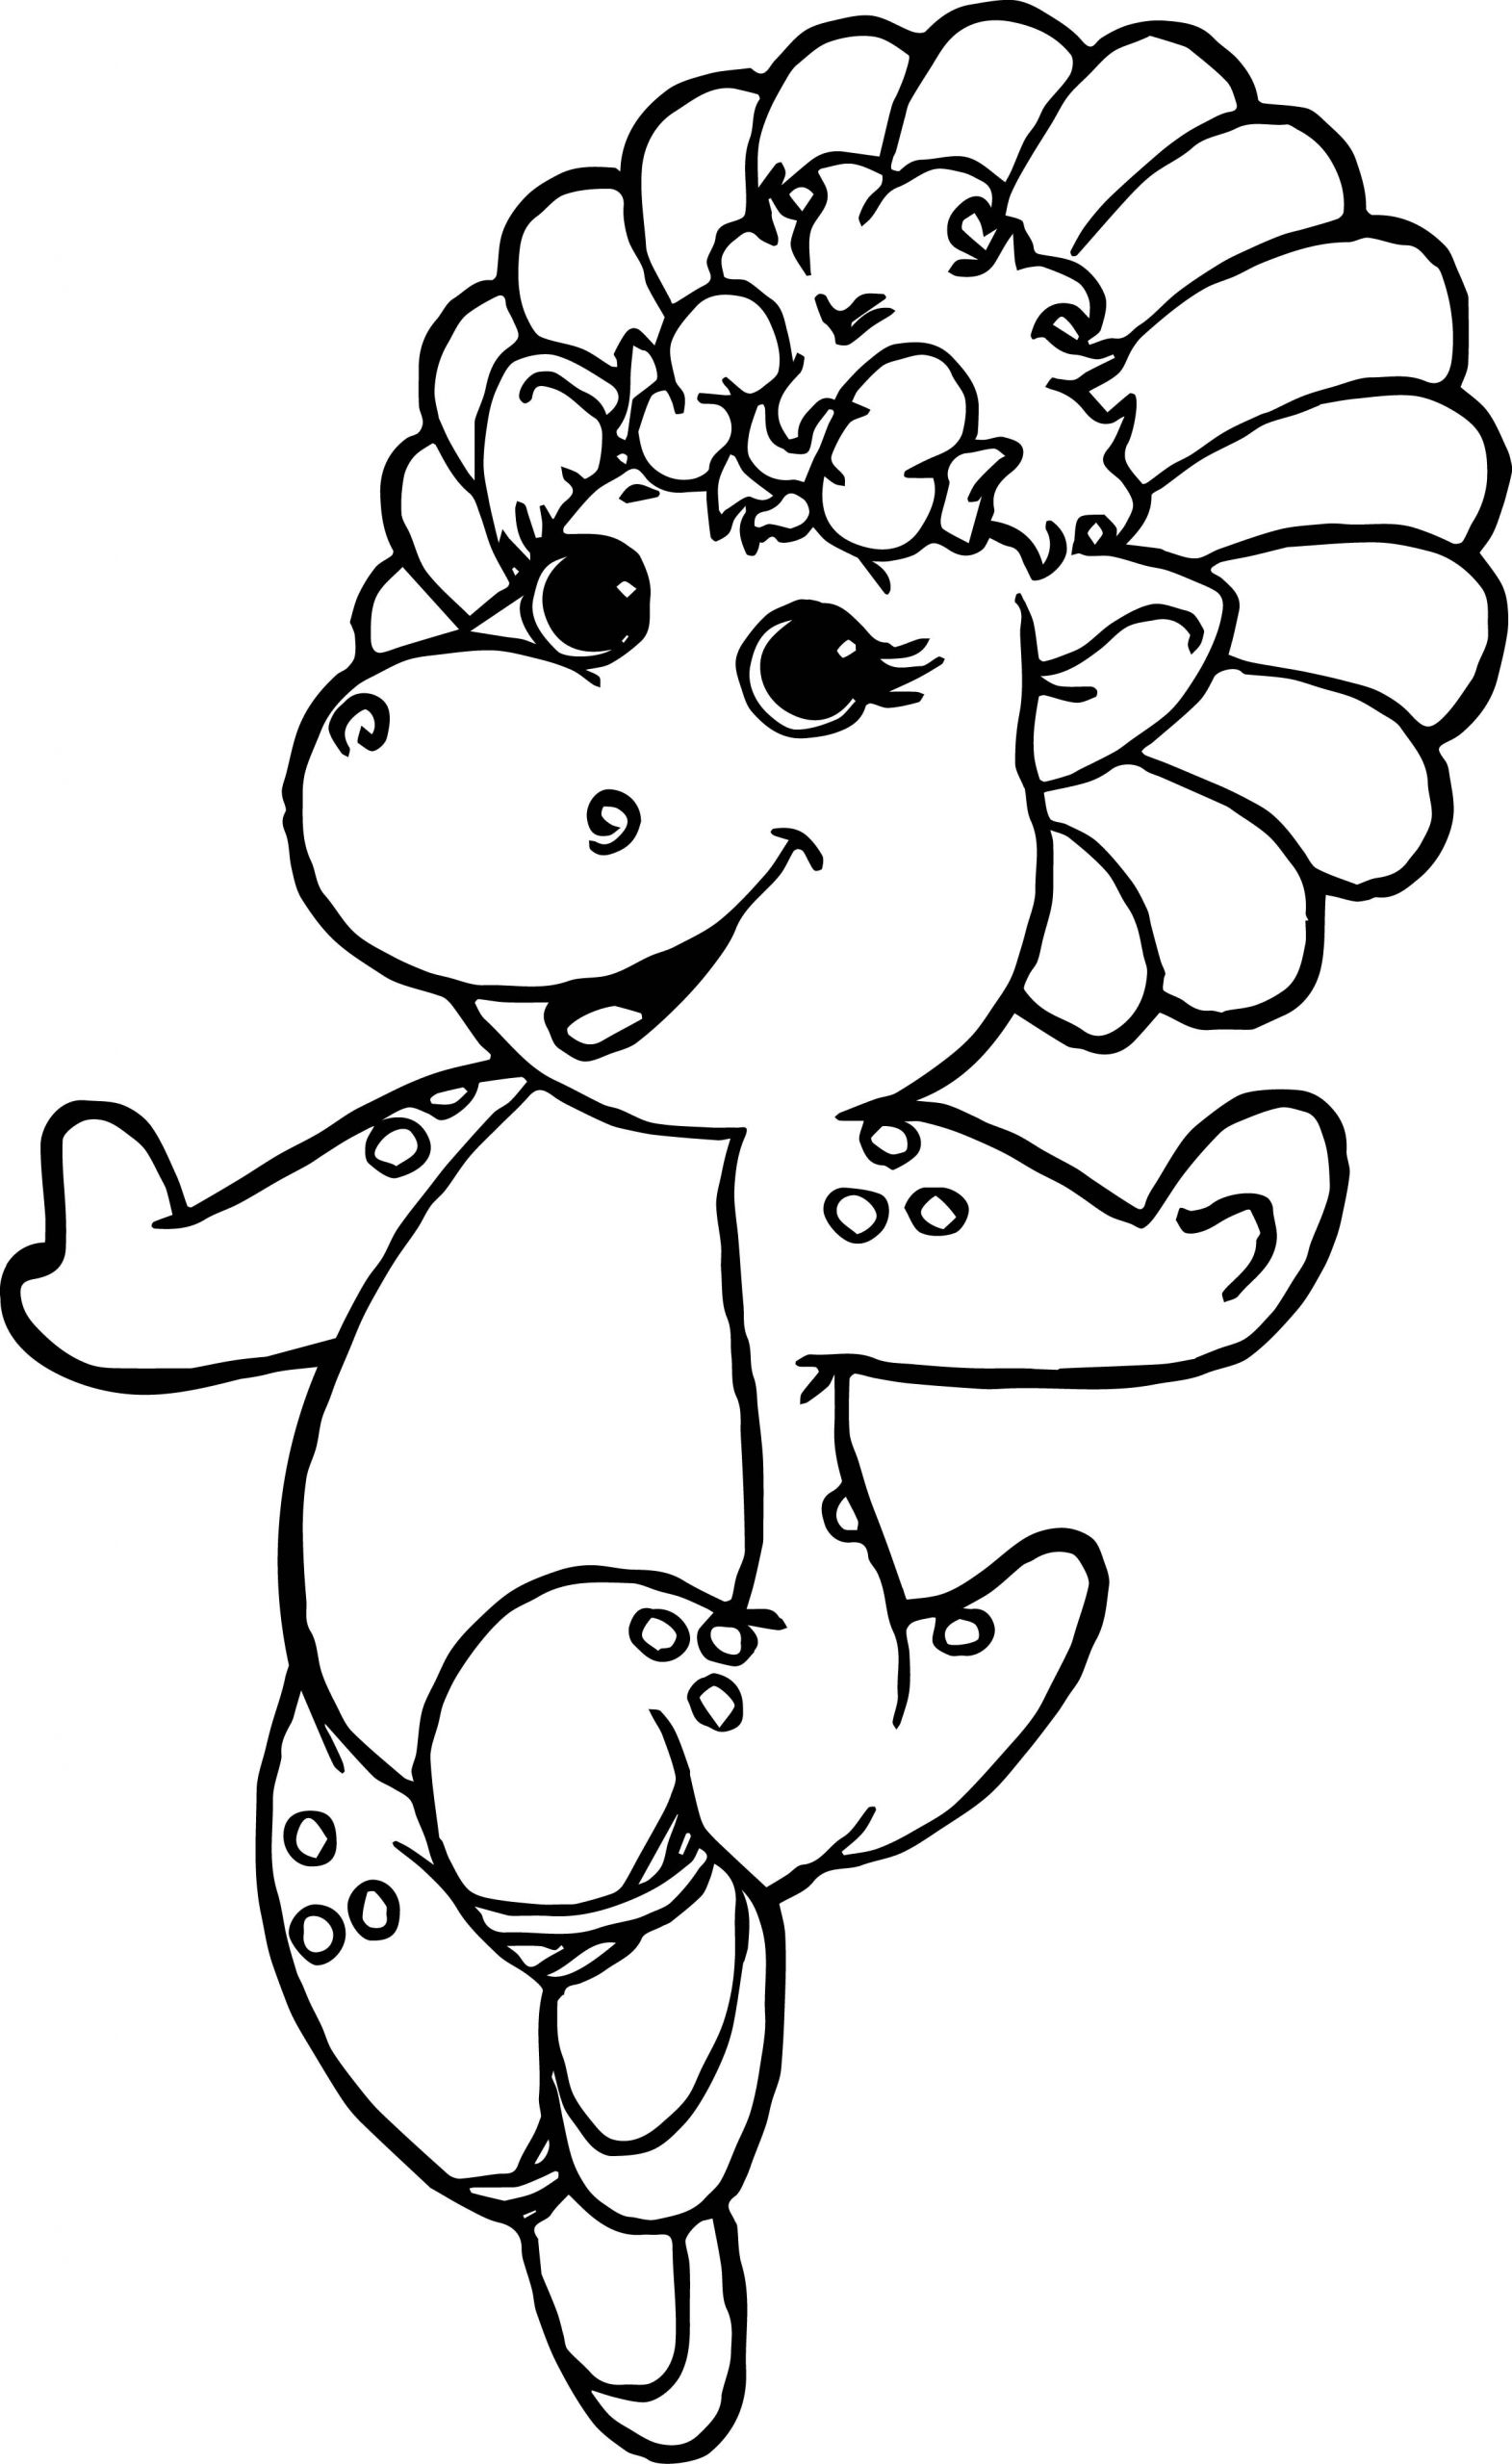 Baby Bop Coloring Pages
 Baby Bop Walking Coloring Page